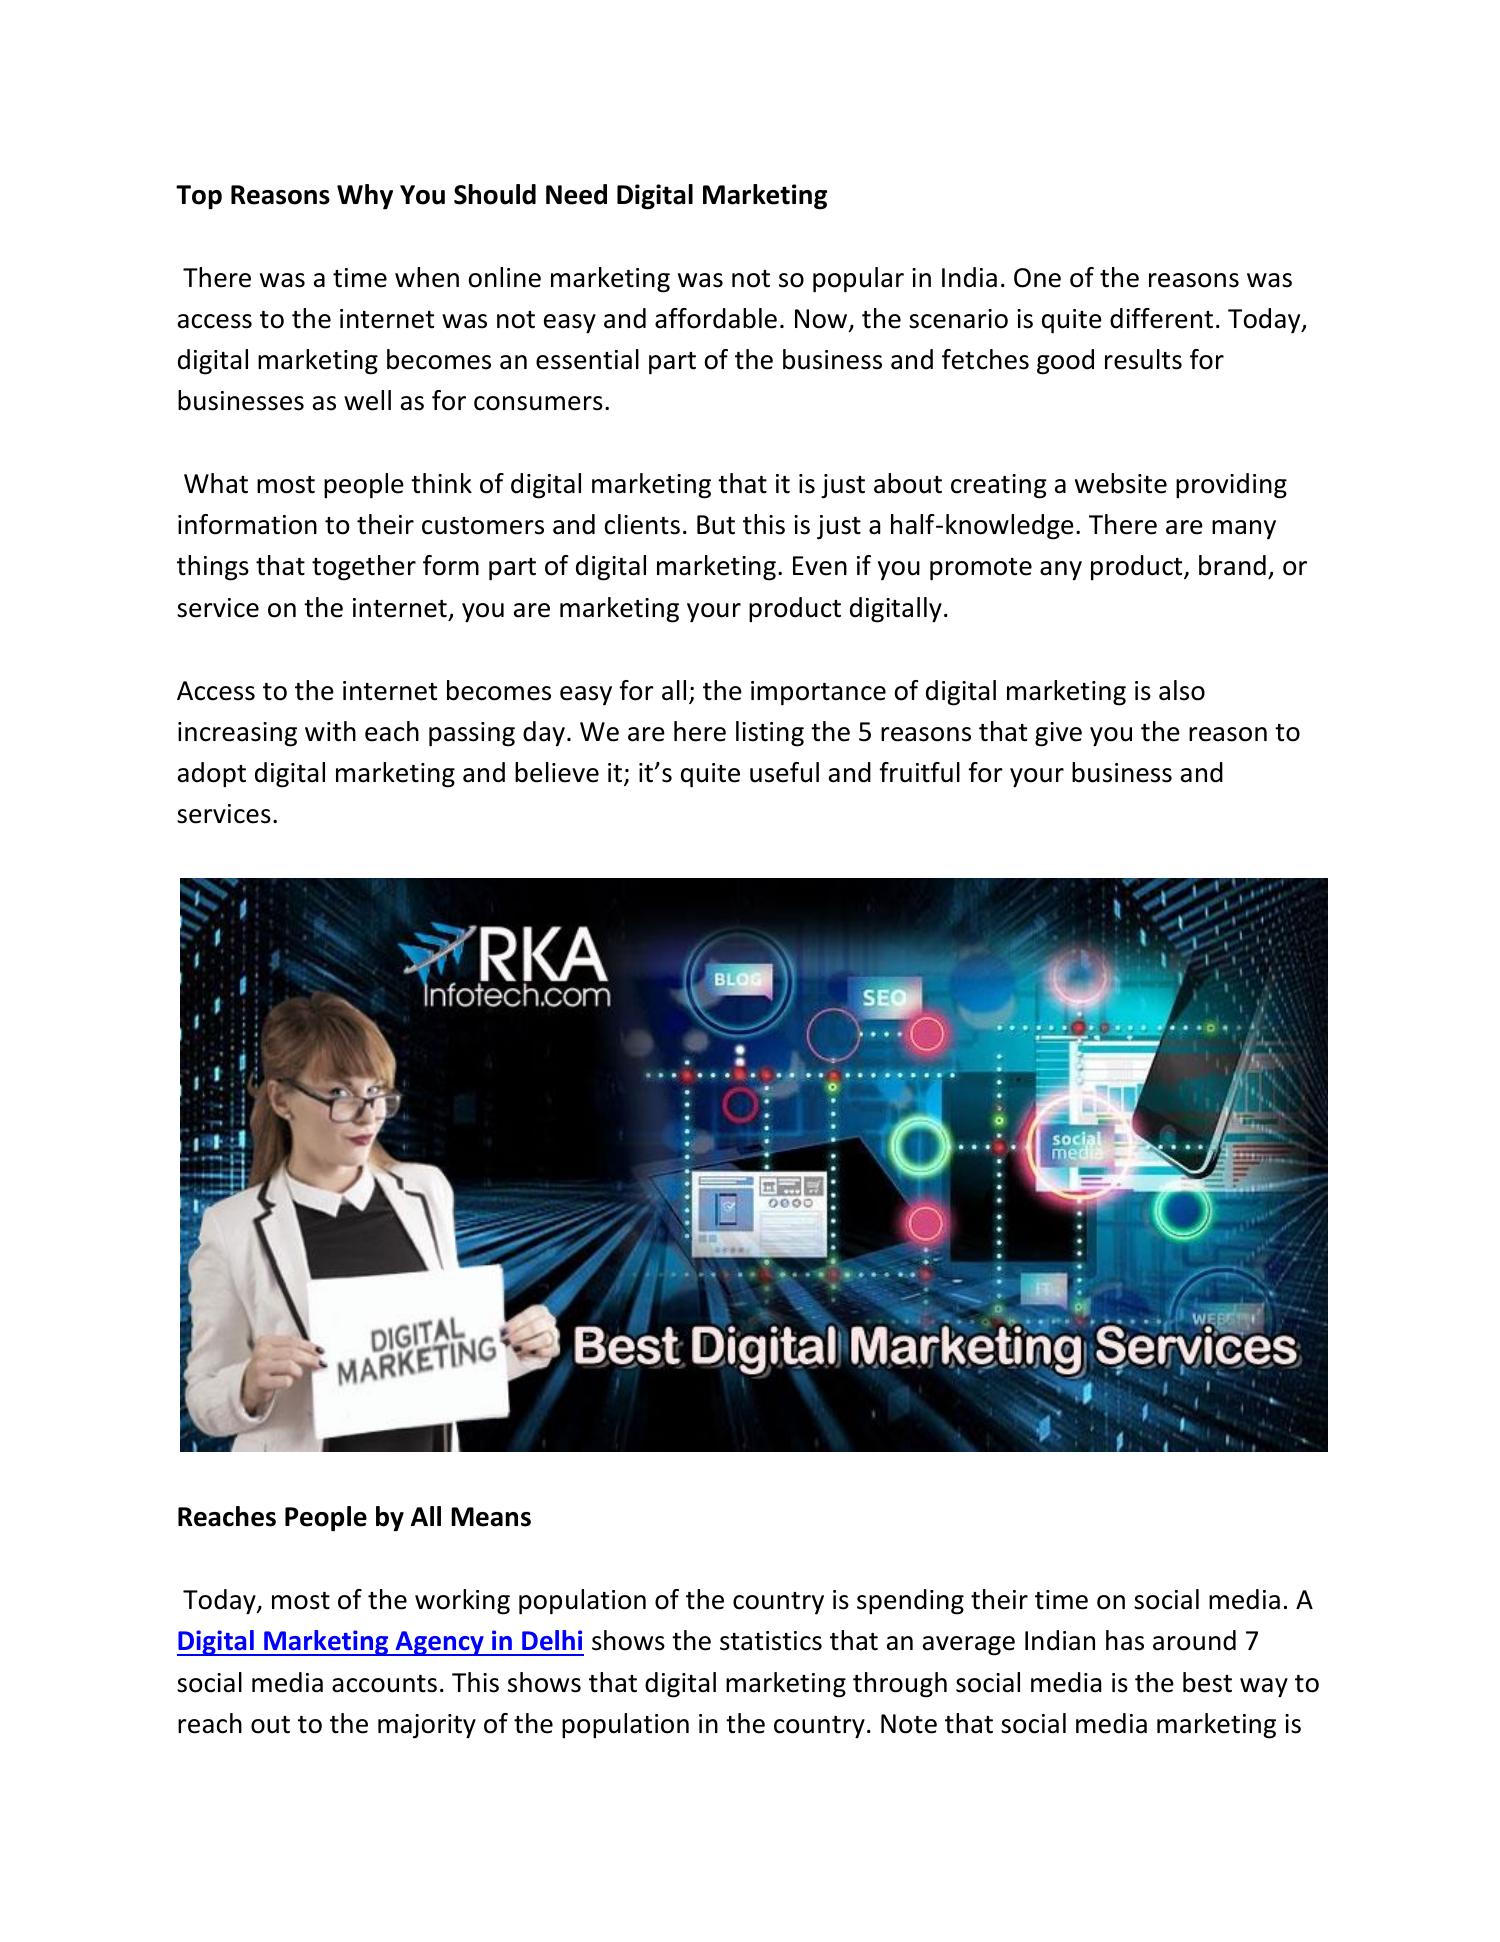 Top Reasons Why You Should Need Digital Marketing-converted.pdf